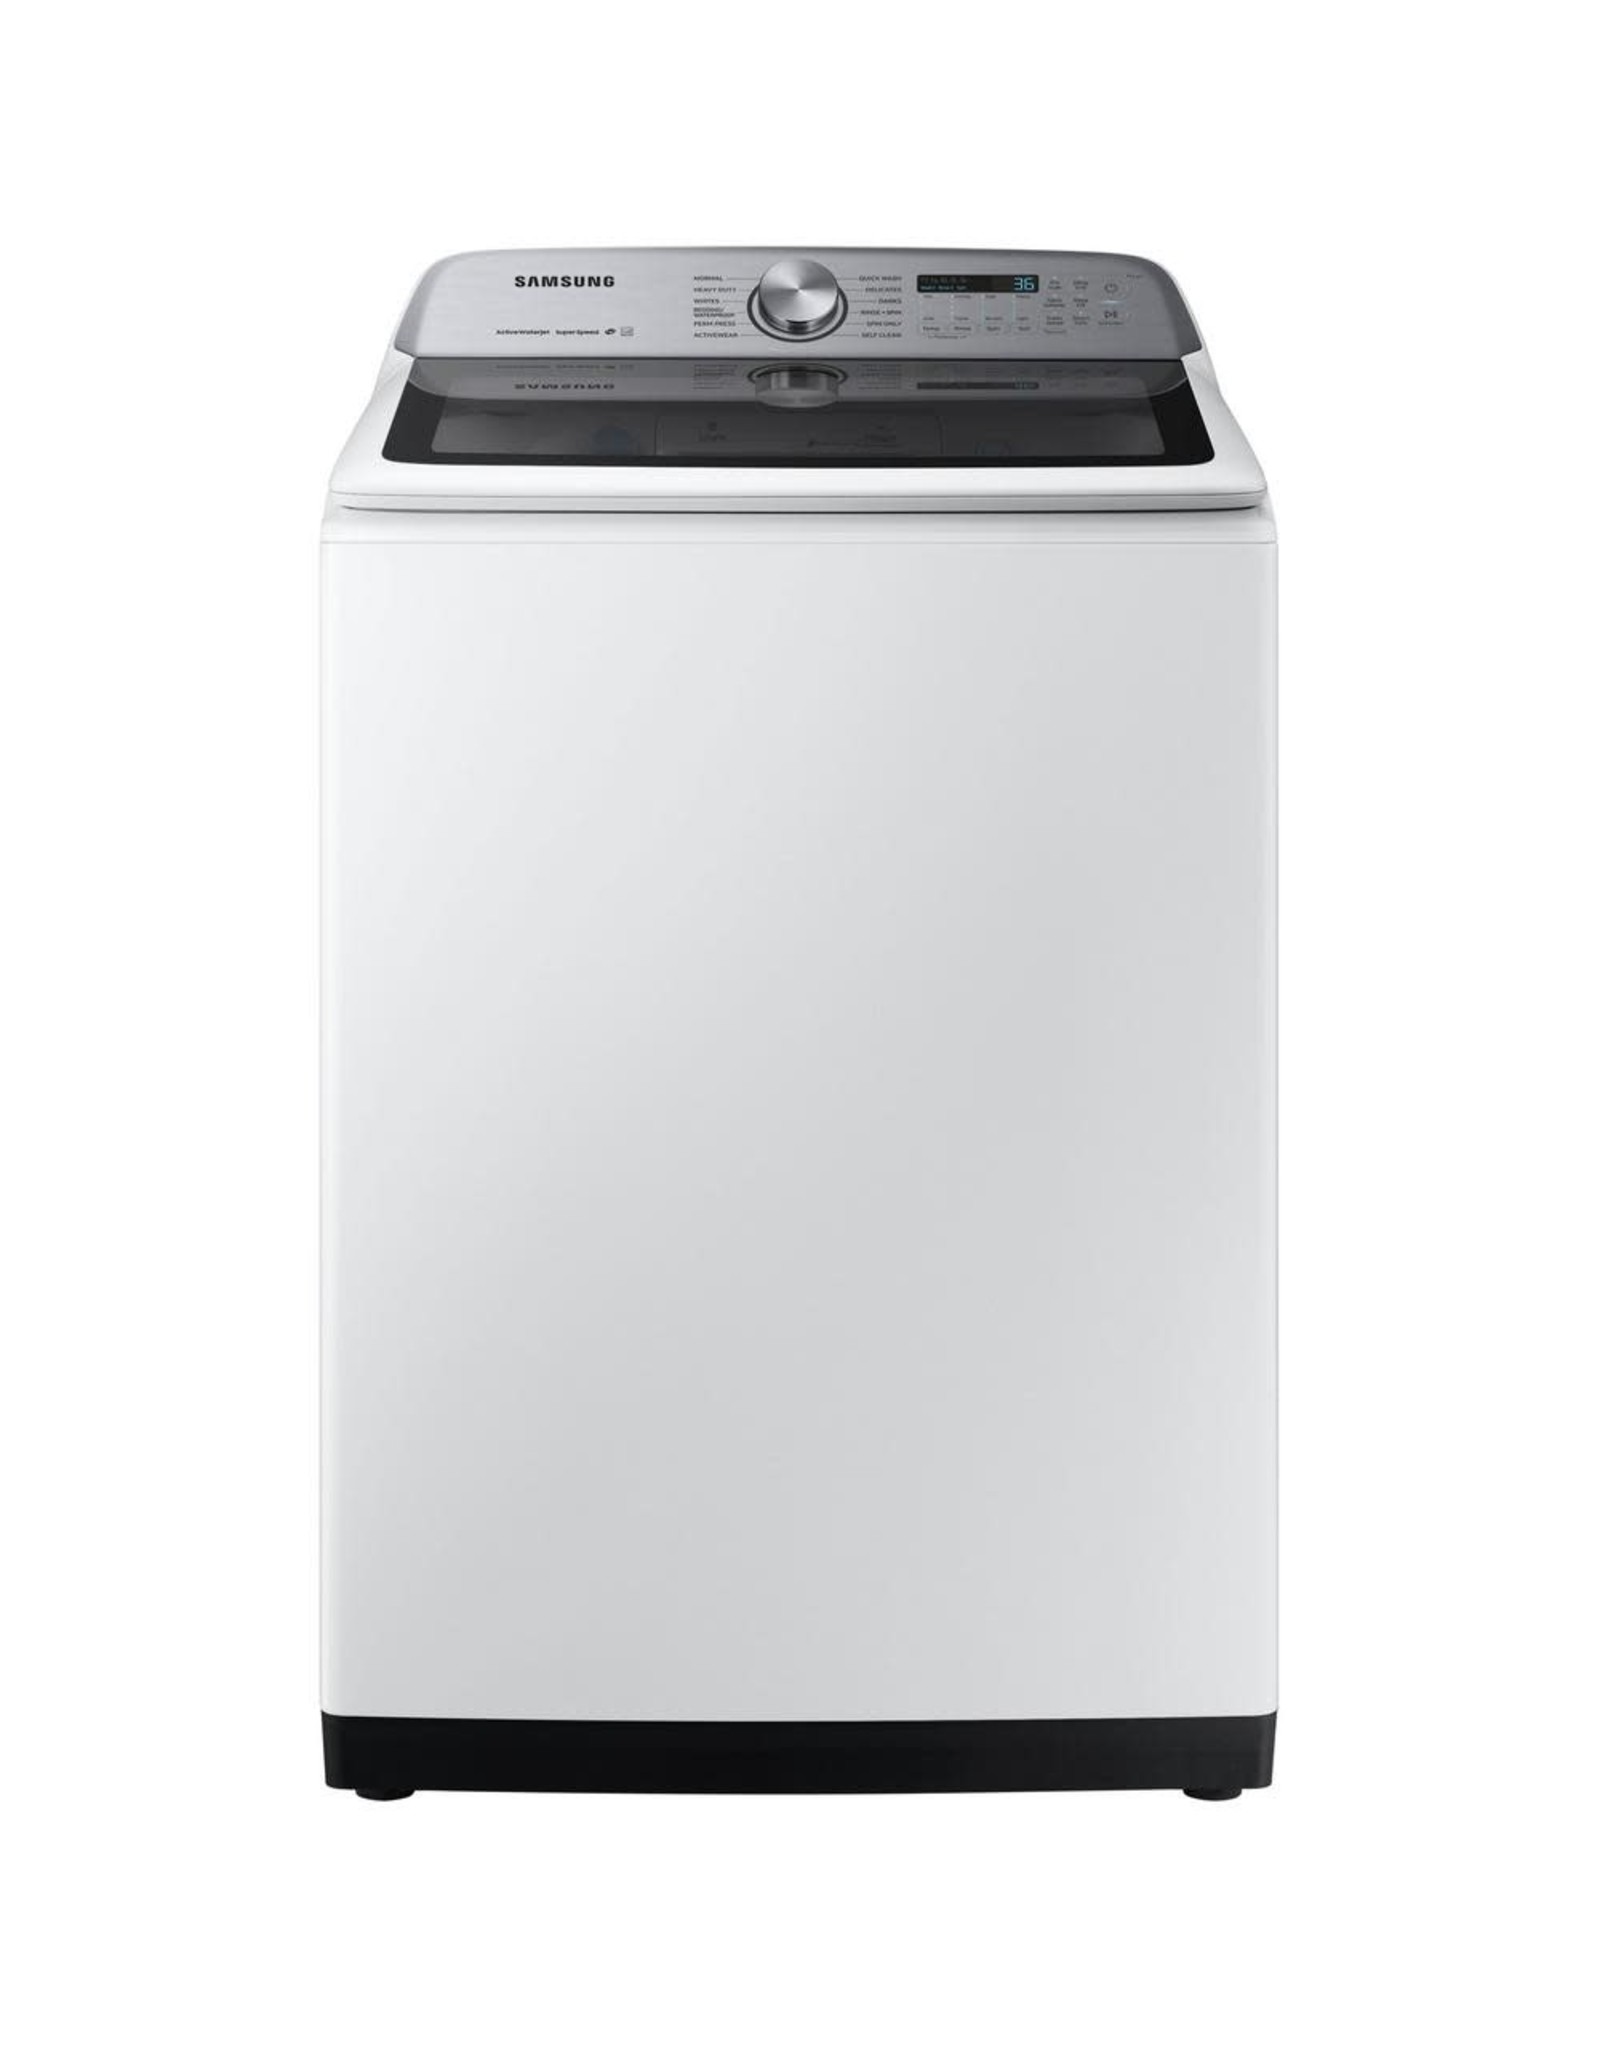 SAMSUNG NEW  WA50R5400AW  5.0 cu. ft. High-Efficiency in White Top Load Washing Machine with Super Speed, ENERGY STAR